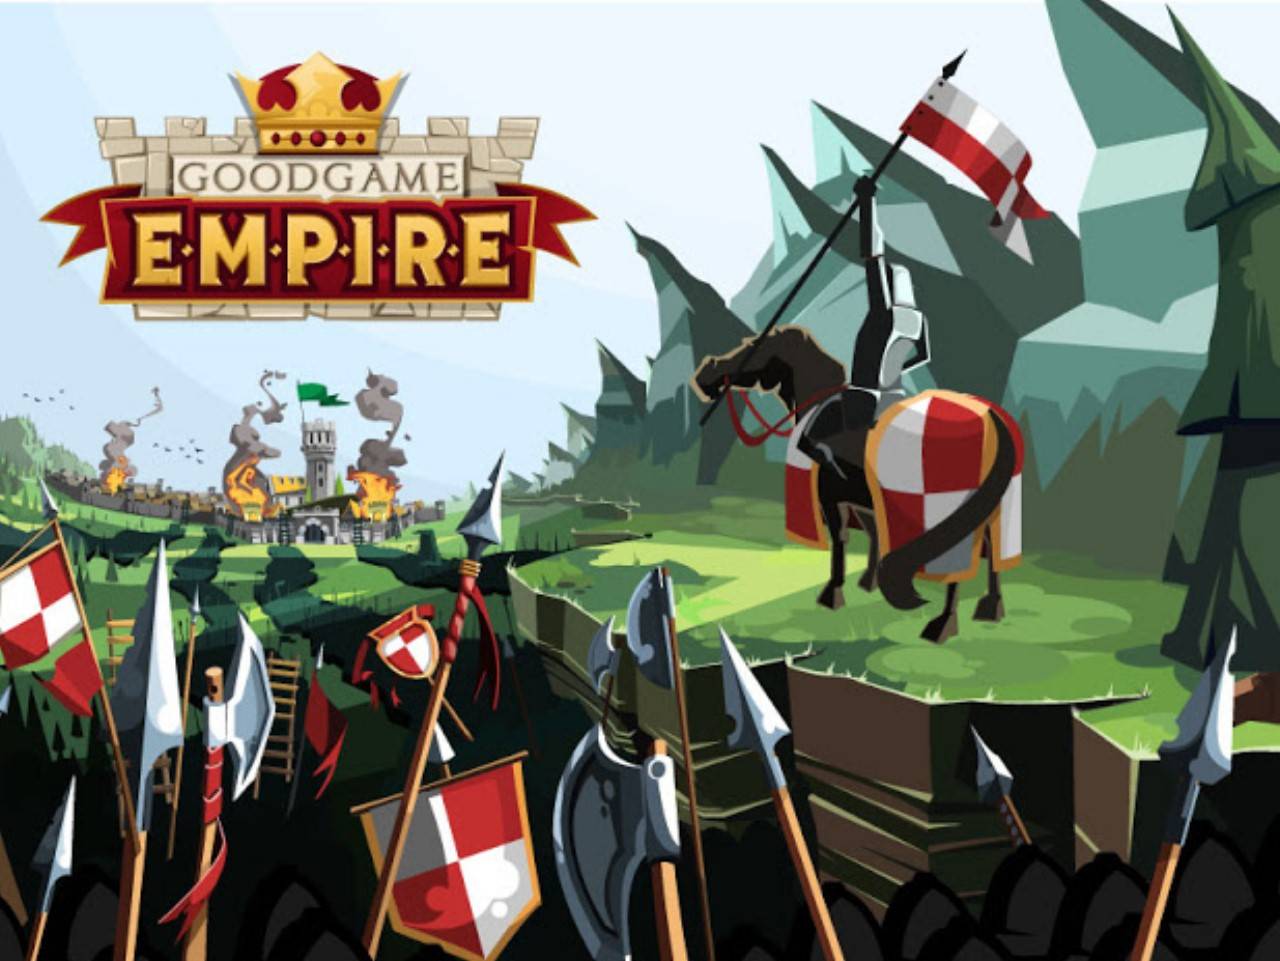 Goodgame Empire Wallpaper, Gameplay videos, review, news